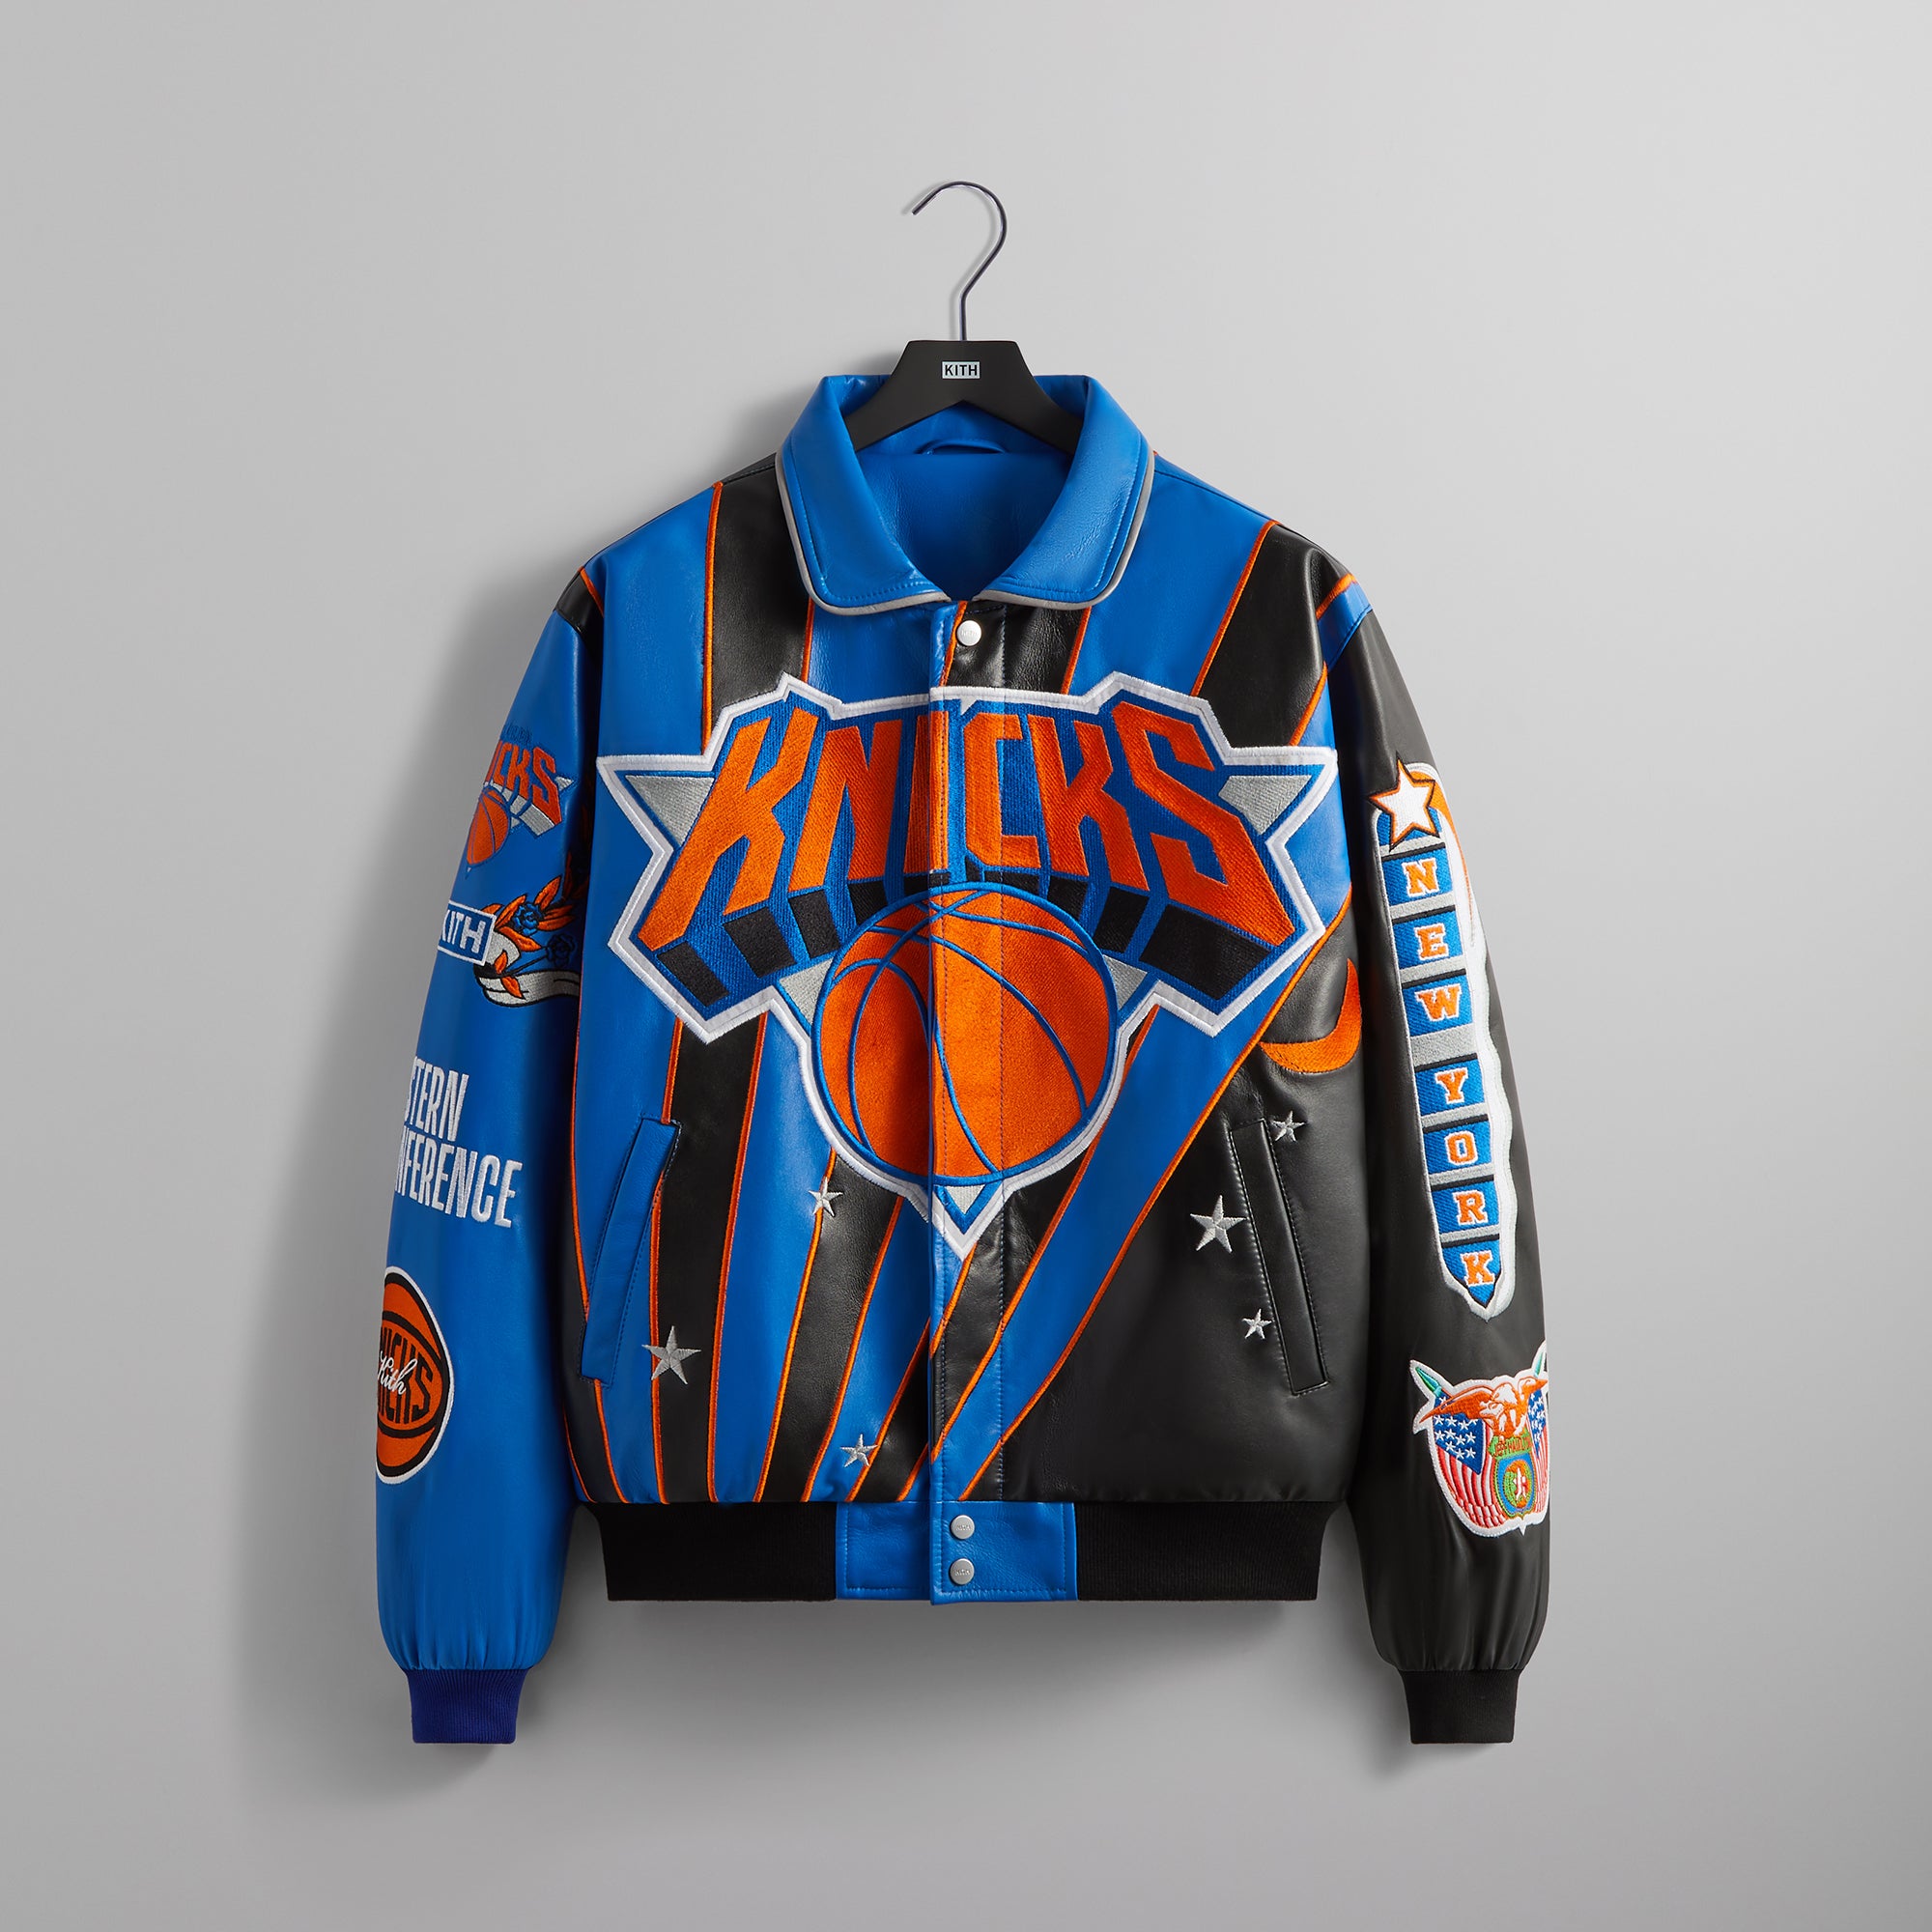 New York Knicks Athletic Shirt and Pants Outfit